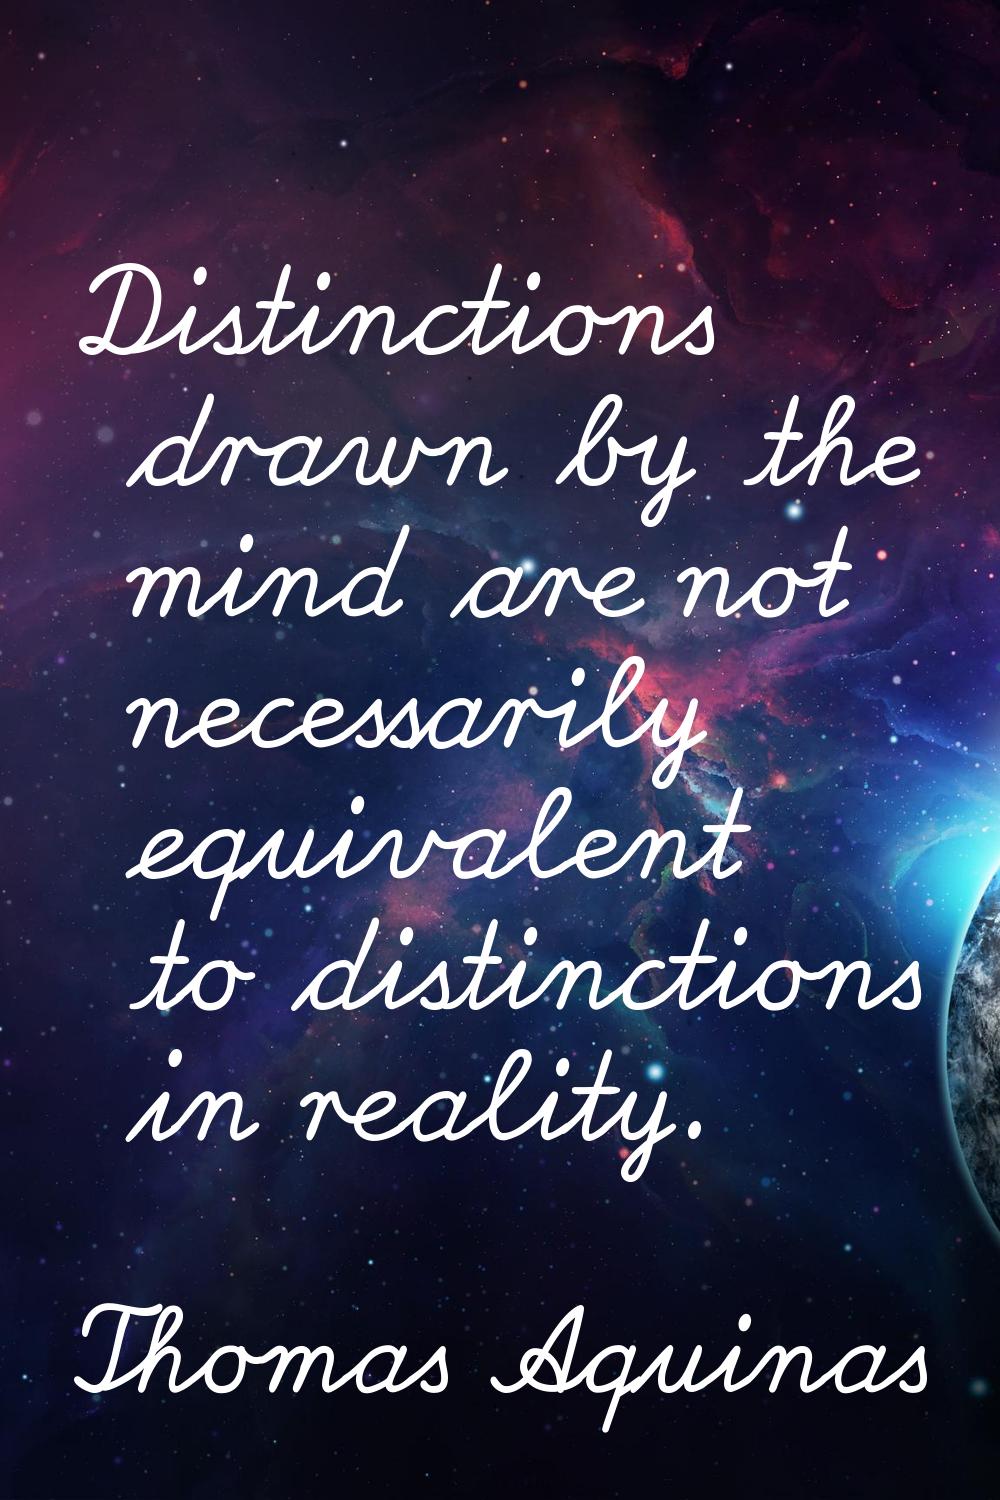 Distinctions drawn by the mind are not necessarily equivalent to distinctions in reality.